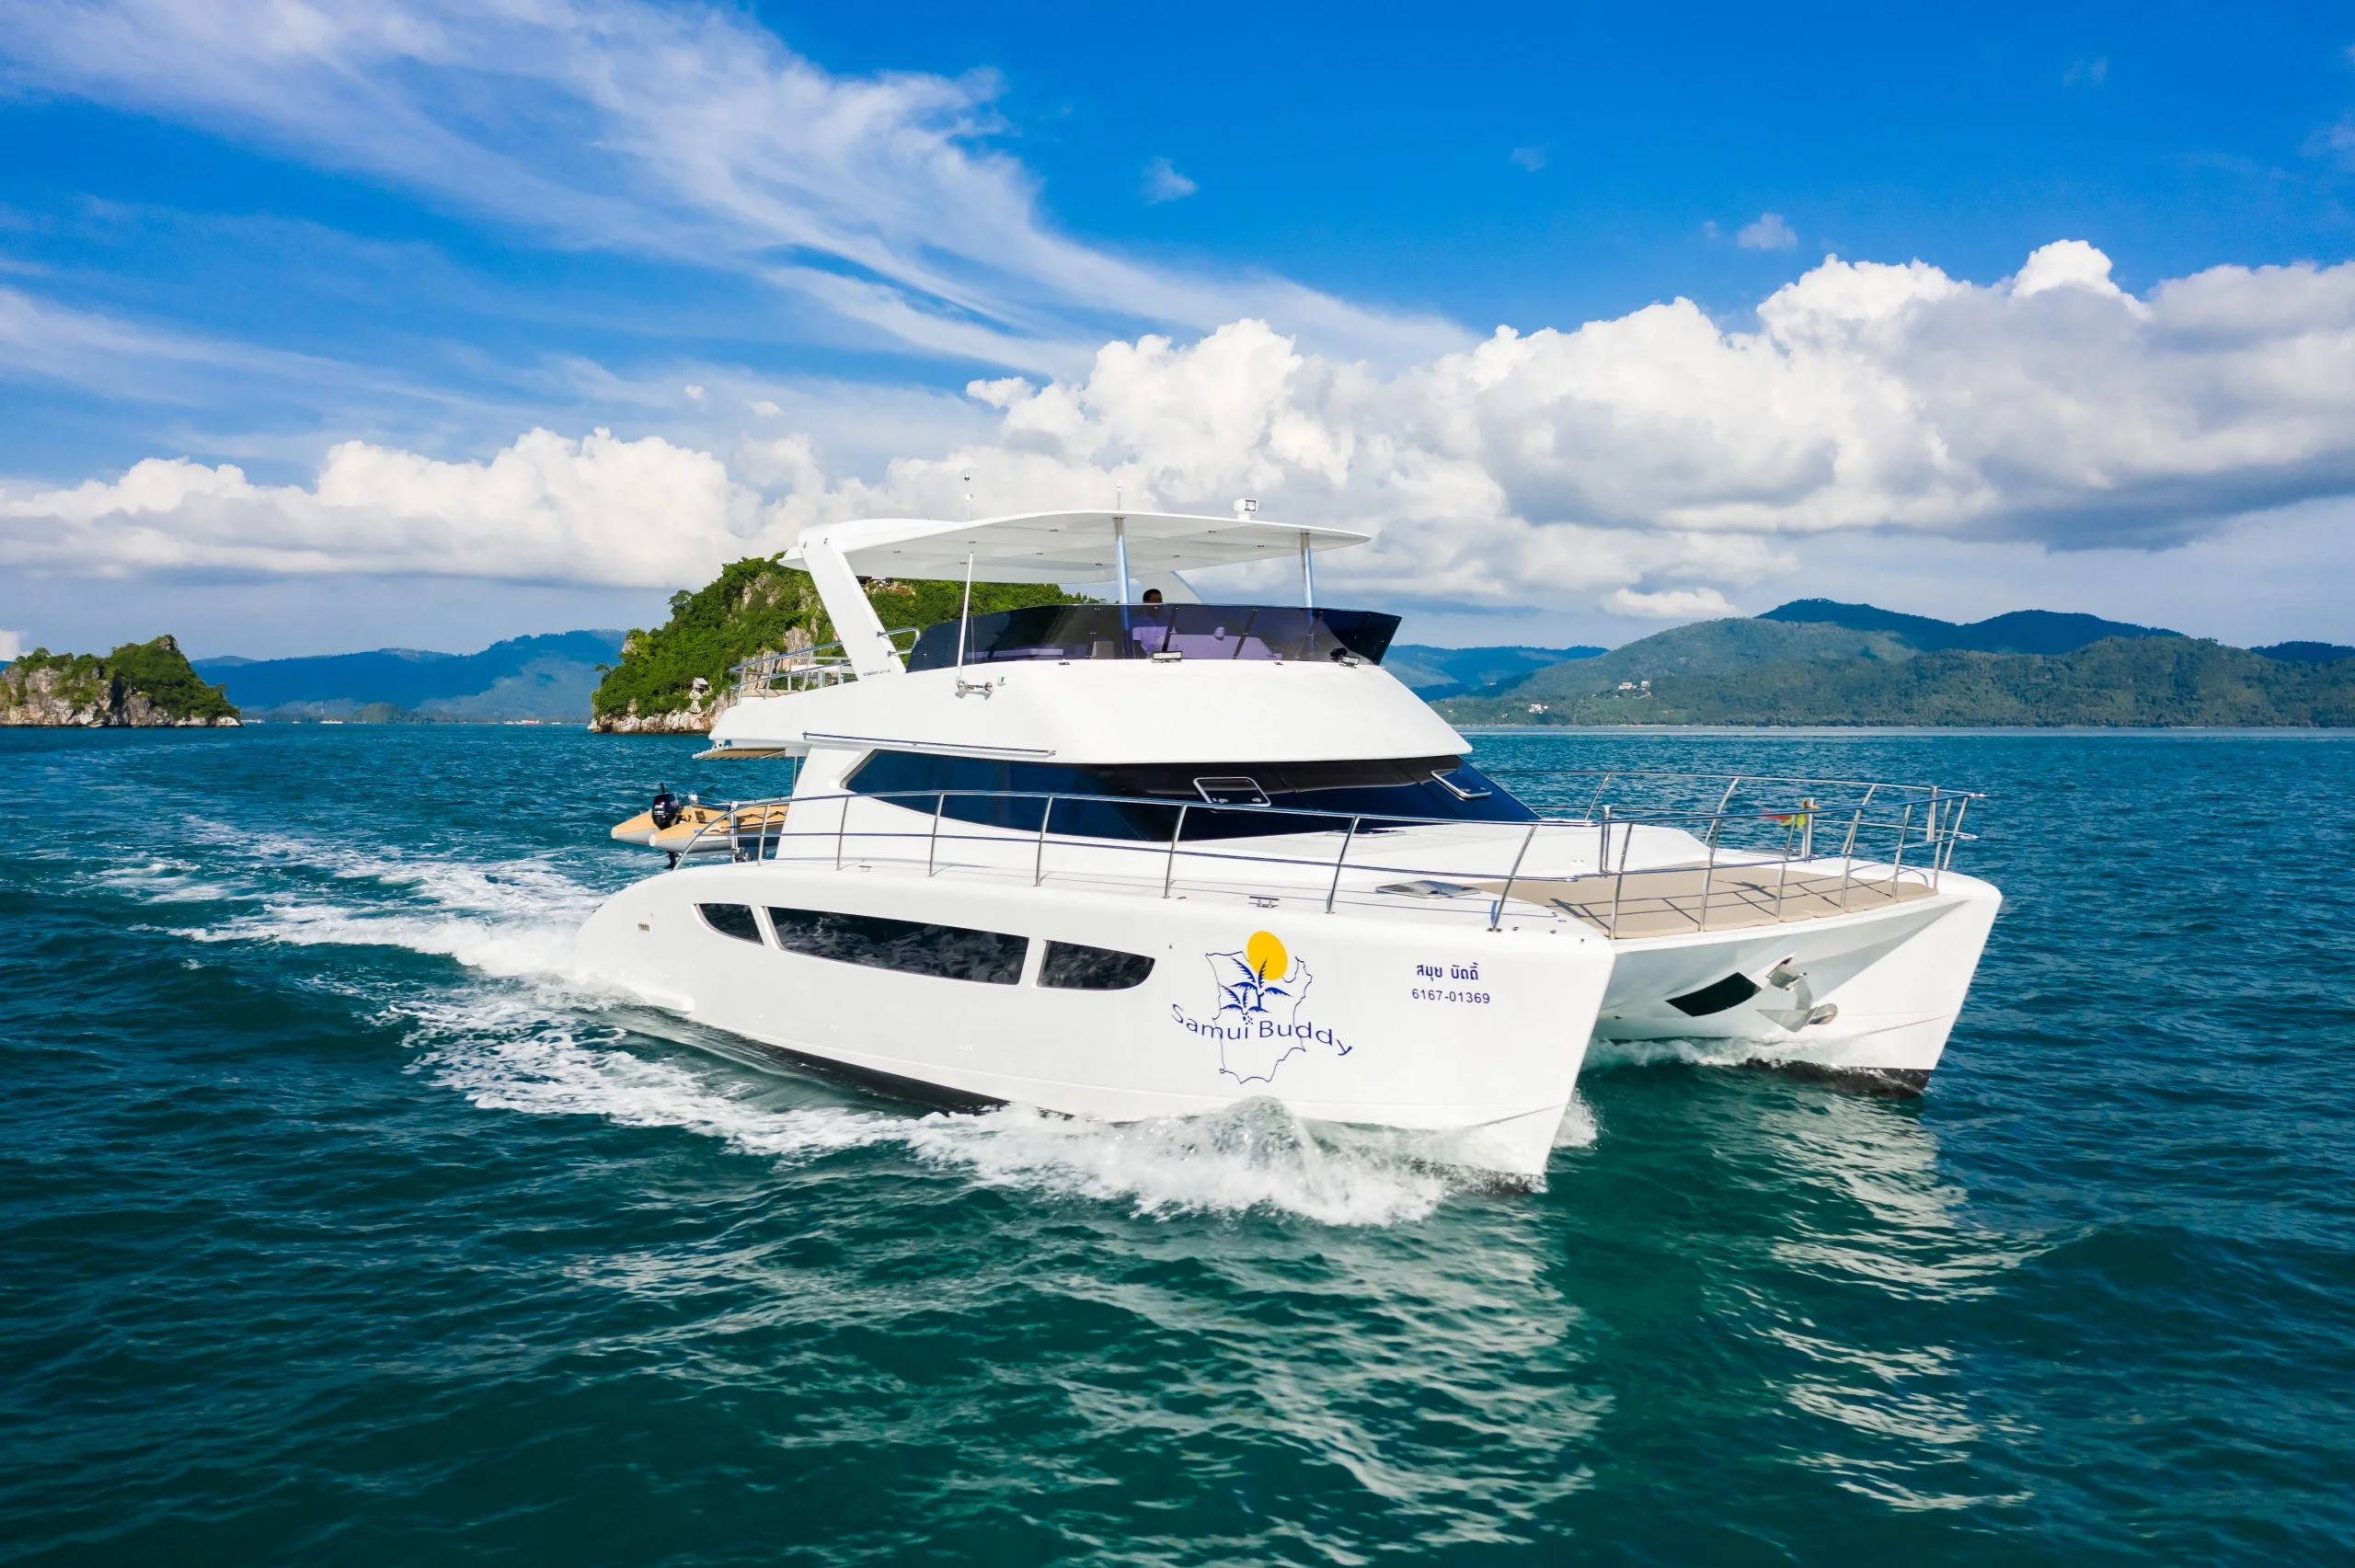 One-of-a-kind boat rental in Koh Samui for spending time during your vacation.